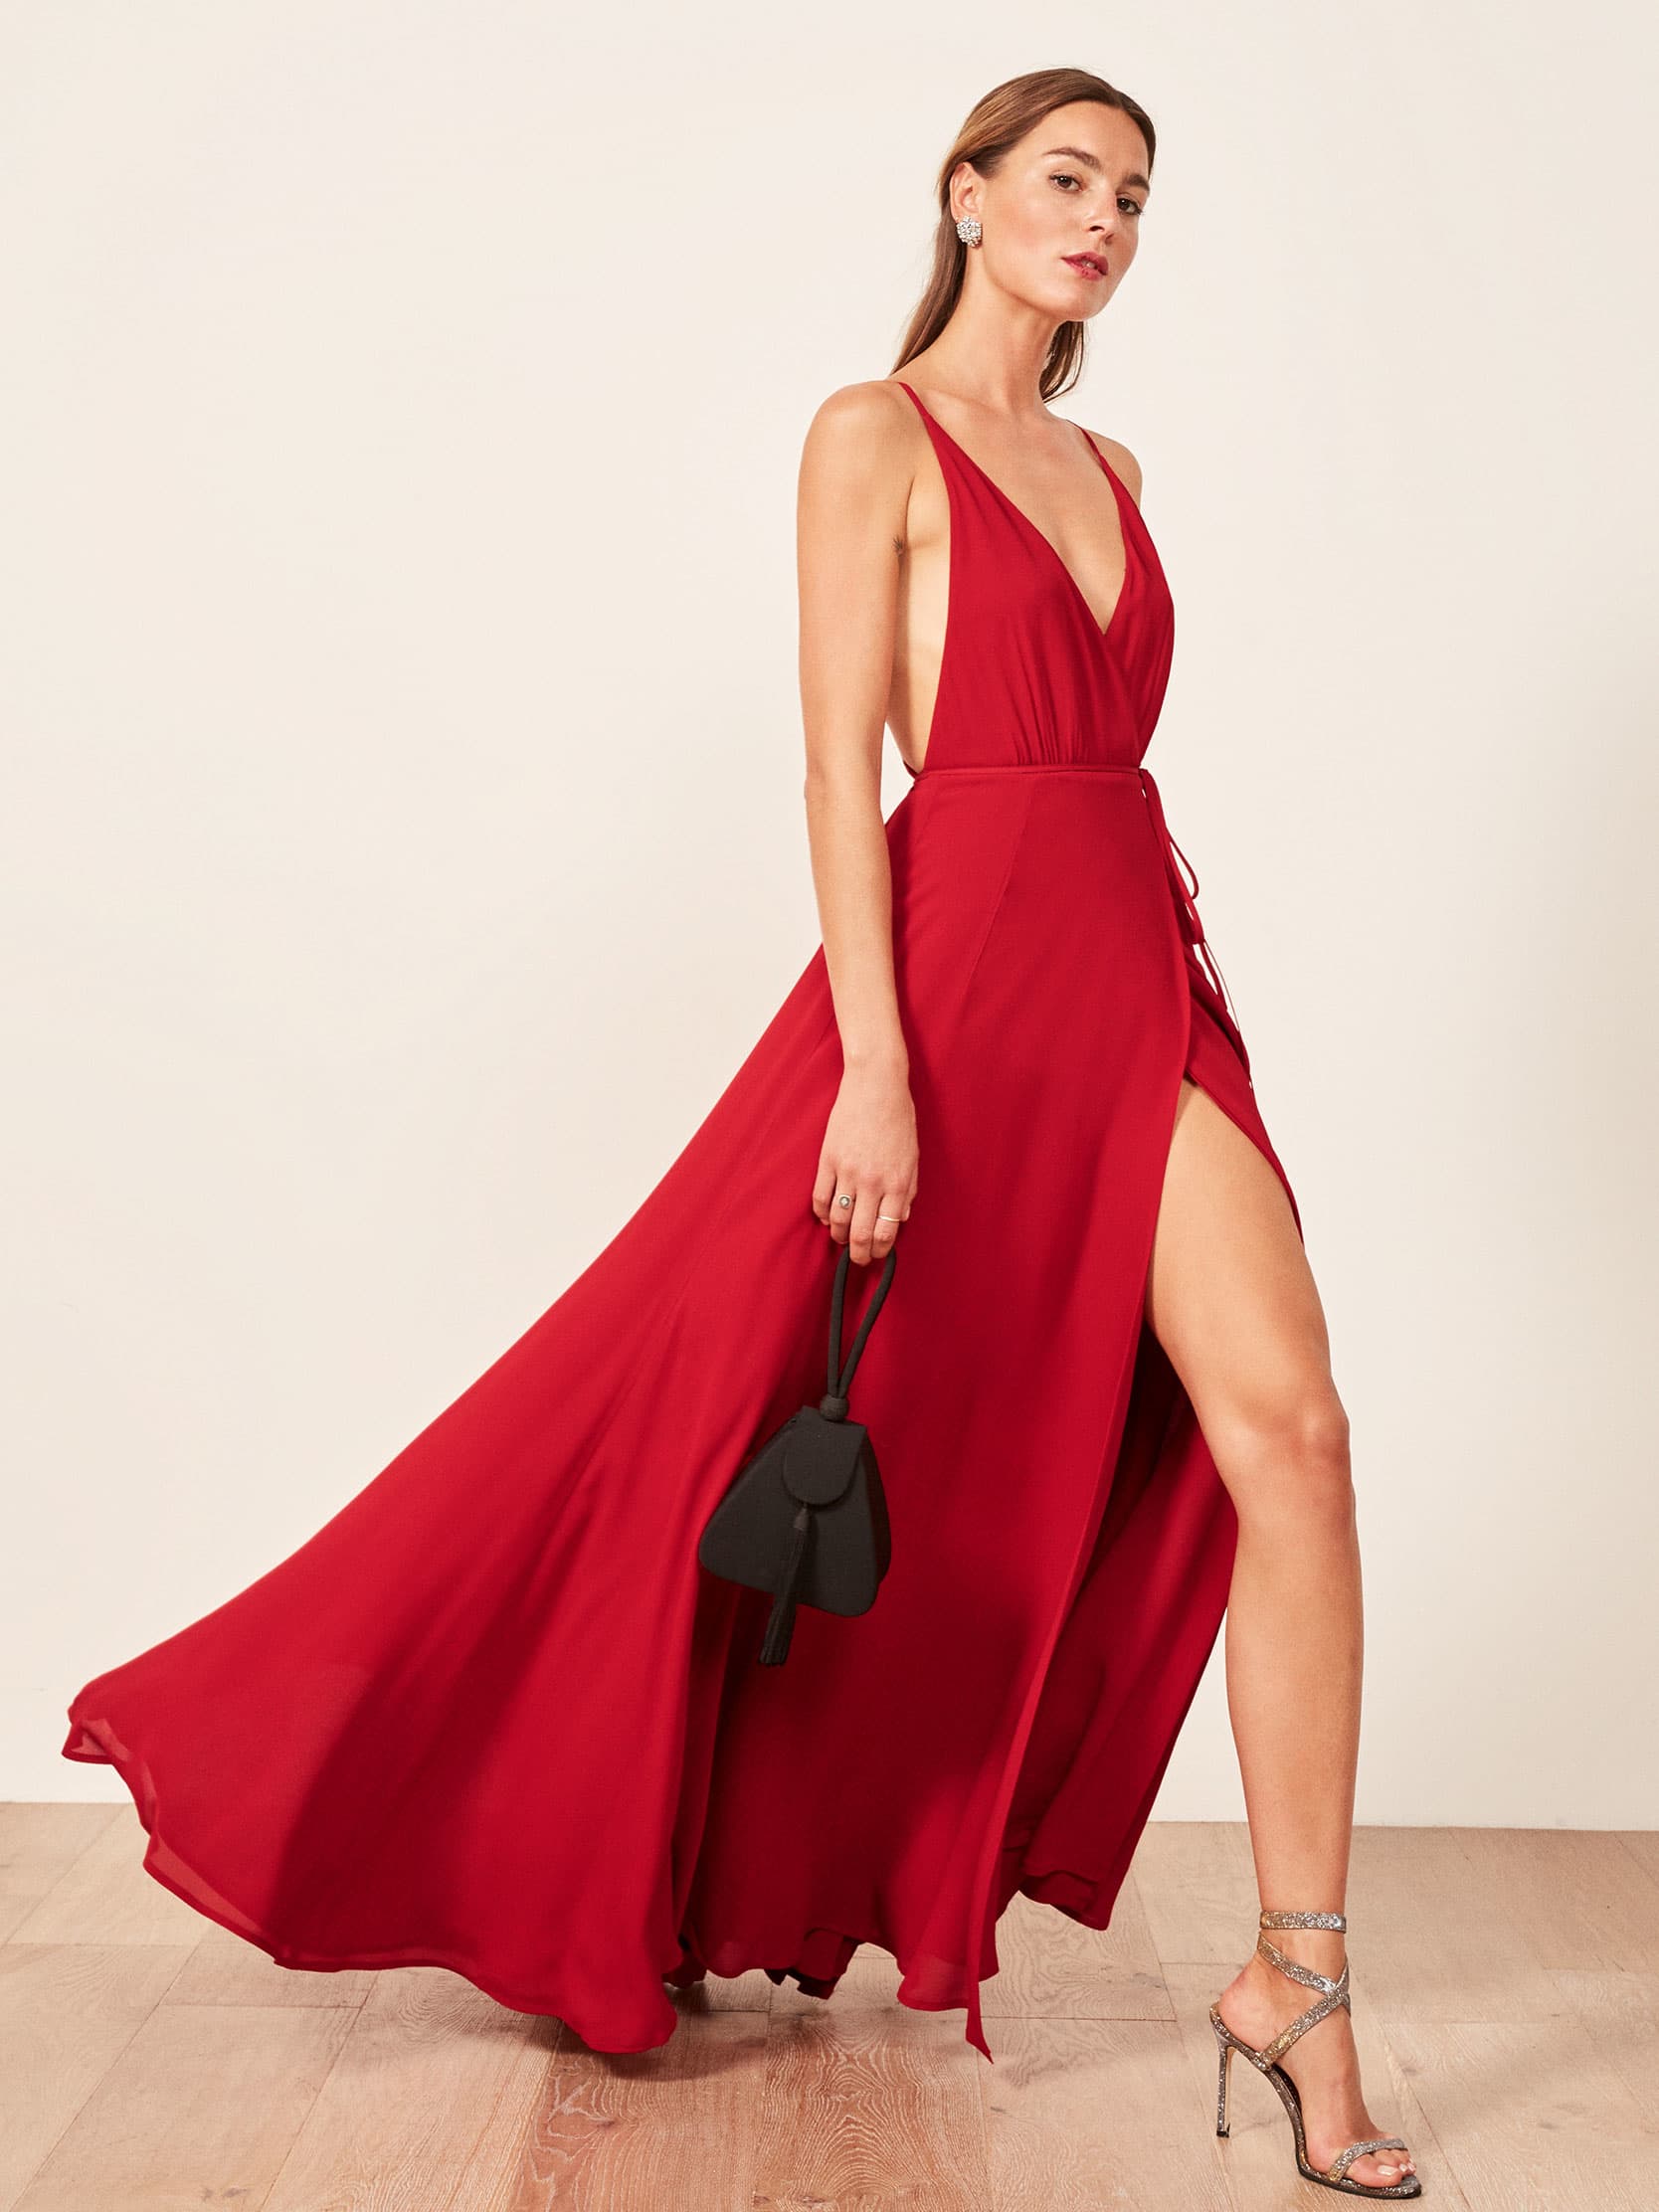 Callalily Dress | Reformation